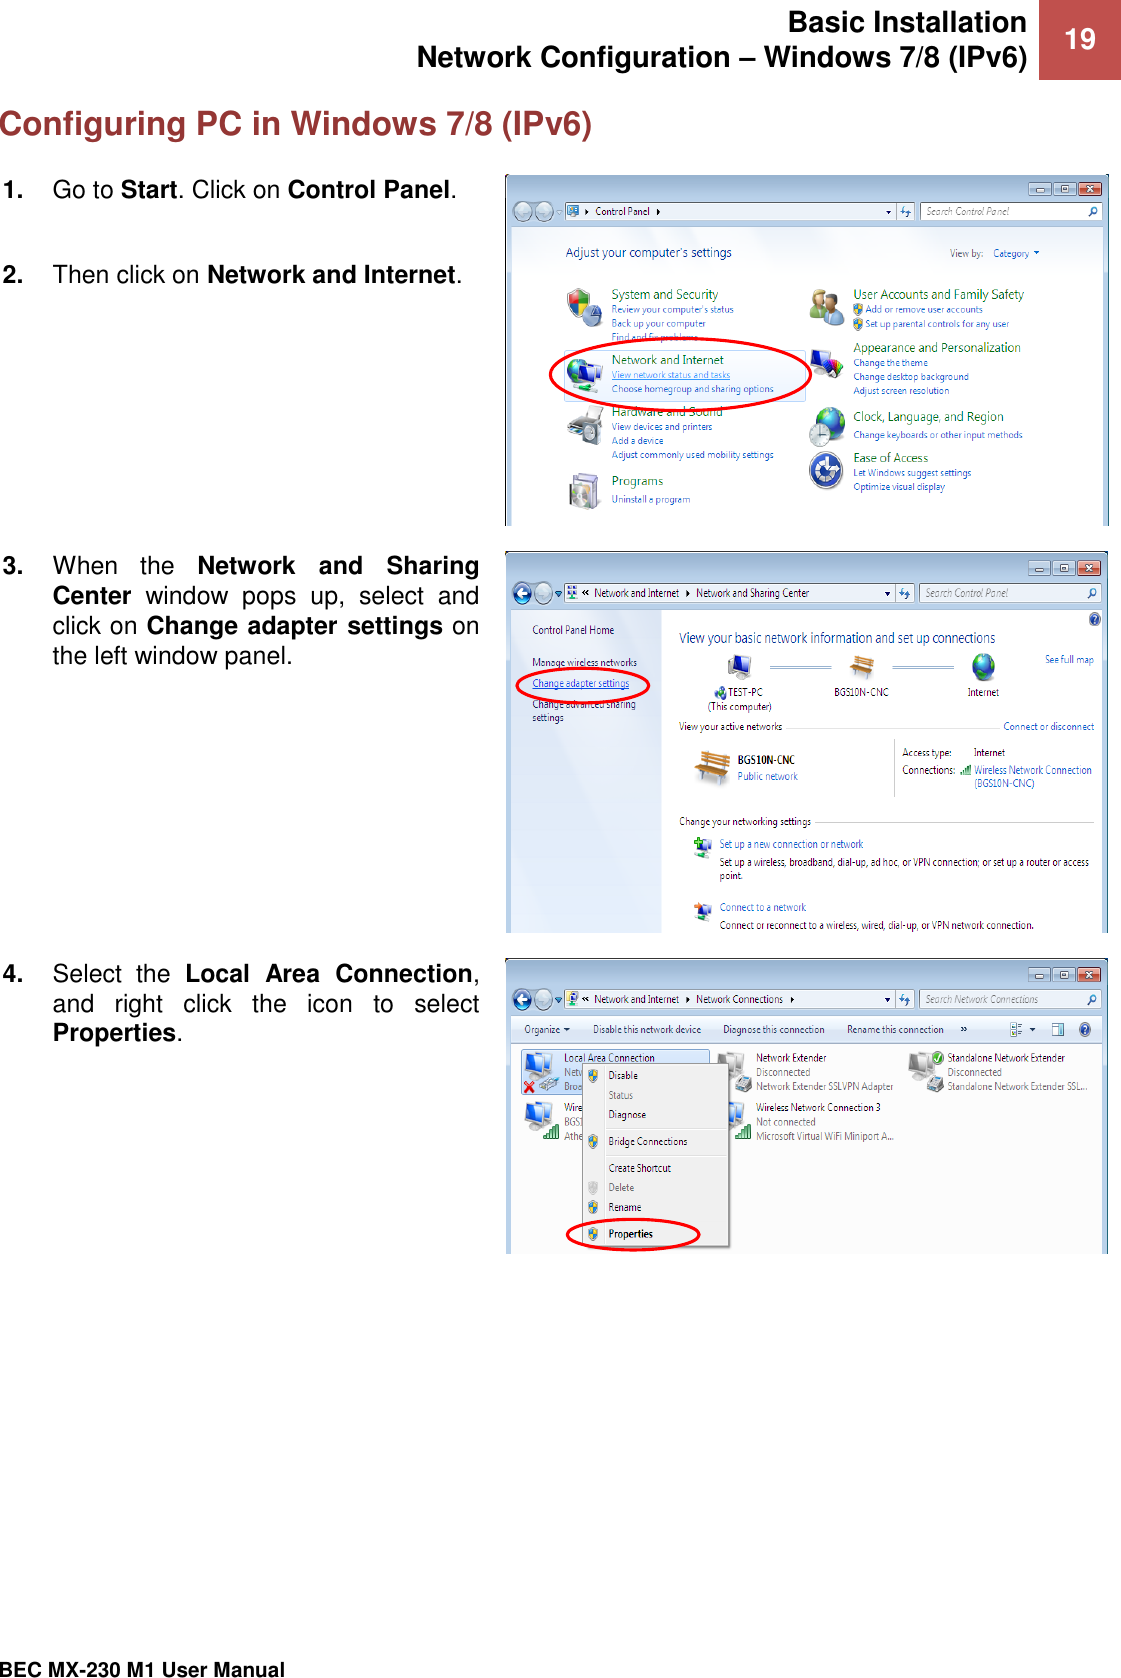 Basic Installation Network Configuration – Windows 7/8 (IPv6) 19   BEC MX-230 M1 User Manual  Configuring PC in Windows 7/8 (IPv6) 1. Go to Start. Click on Control Panel.  2. Then click on Network and Internet.  3. When  the  Network  and  Sharing Center  window  pops  up,  select  and click on Change adapter settings on the left window panel.  4. Select  the  Local  Area  Connection, and  right  click  the  icon  to  select Properties.  